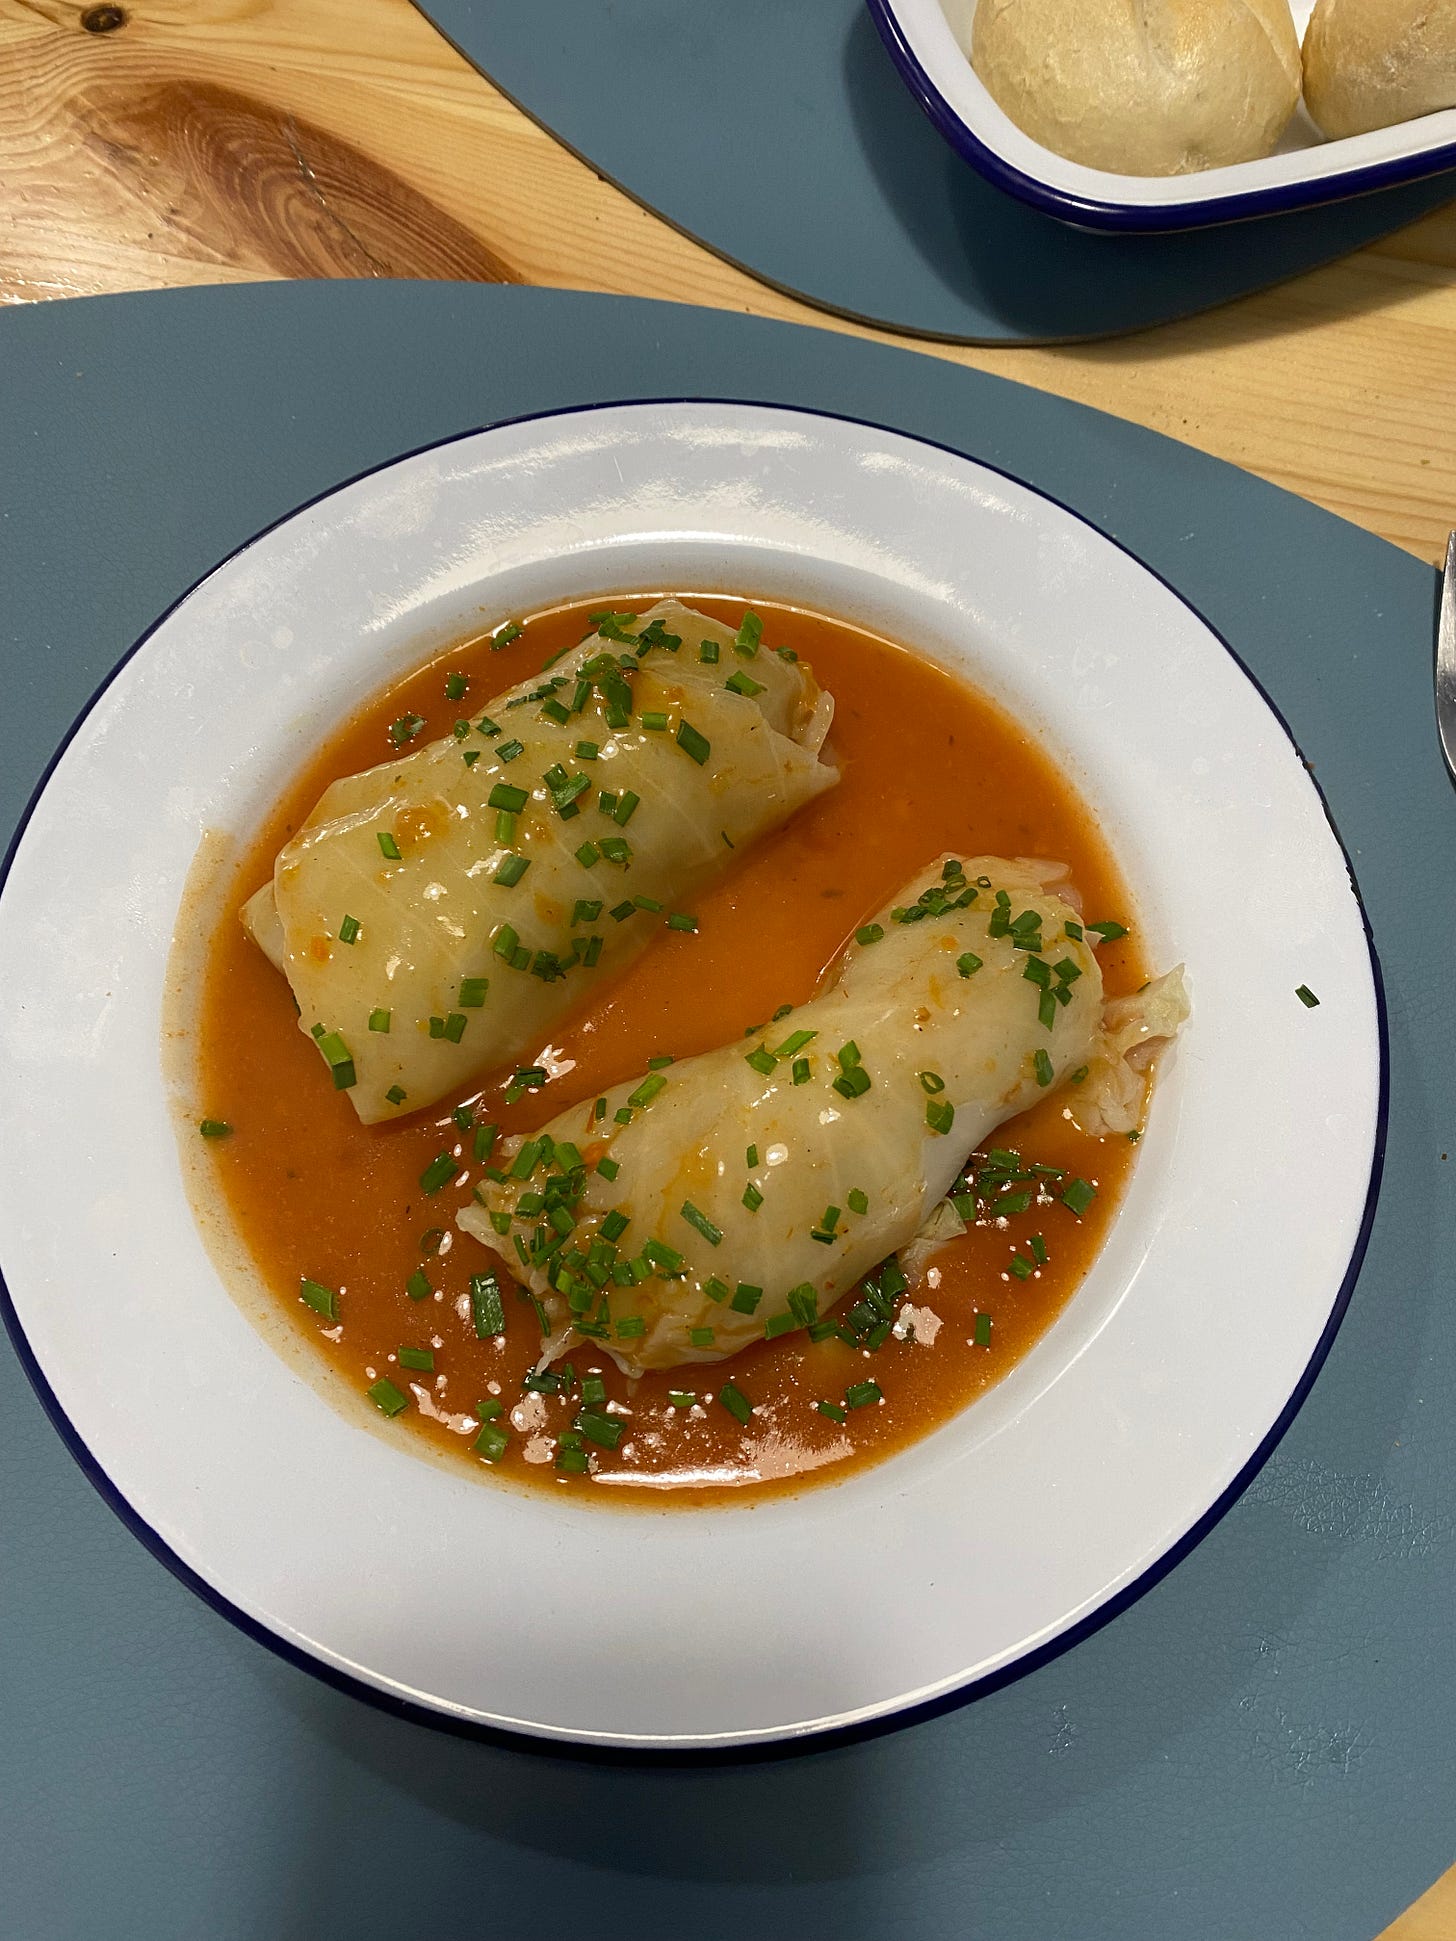 A bowl of cabbage rolls stuffed with rice in a sauce.